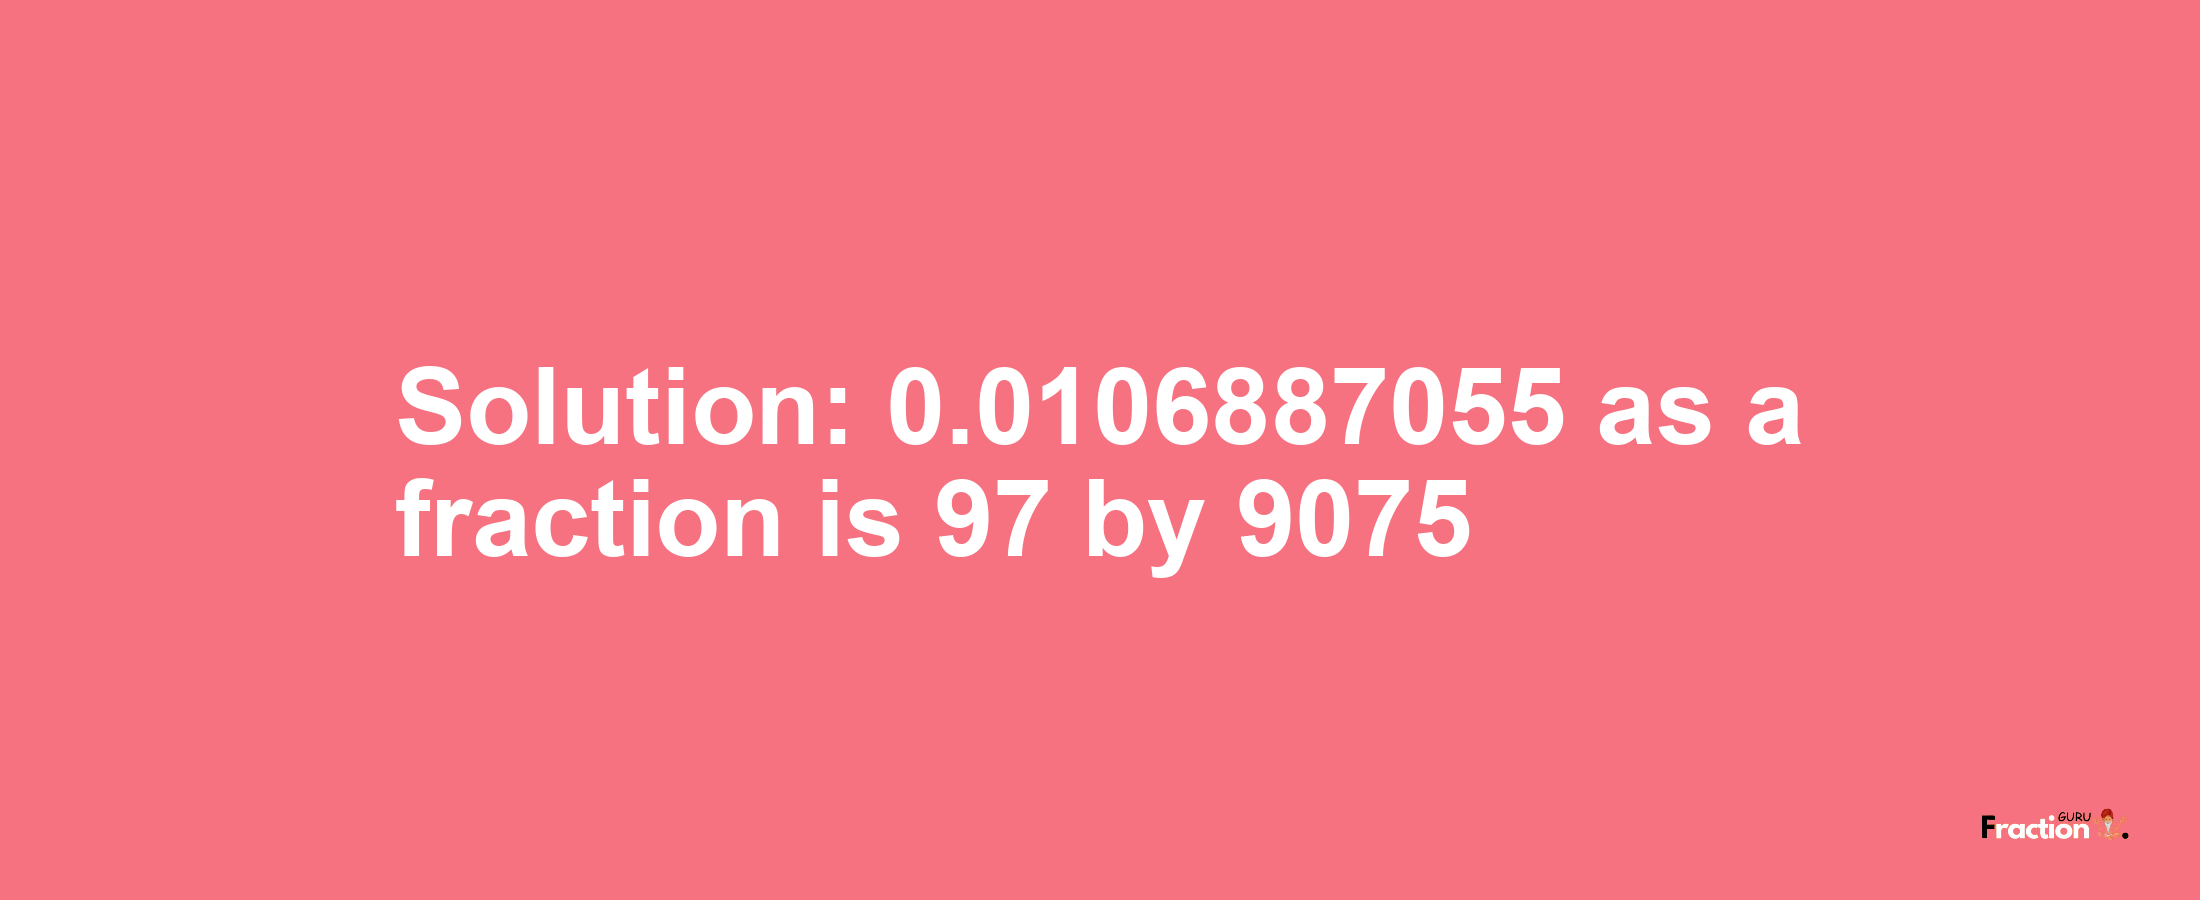 Solution:0.0106887055 as a fraction is 97/9075